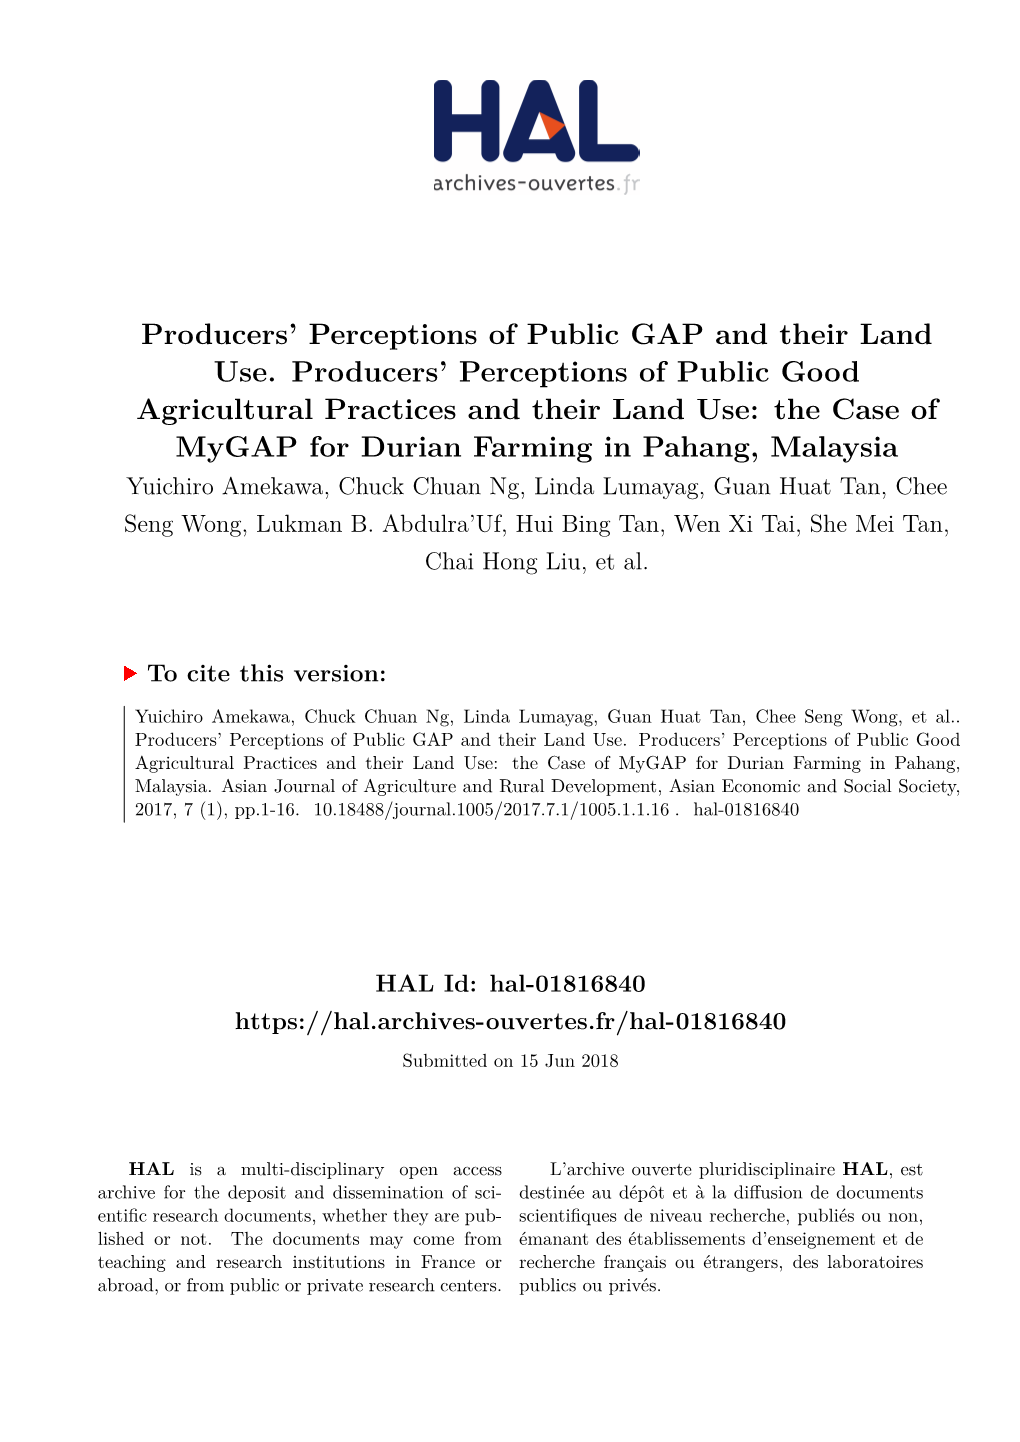 Producers' Perceptions of Public GAP and Their Land